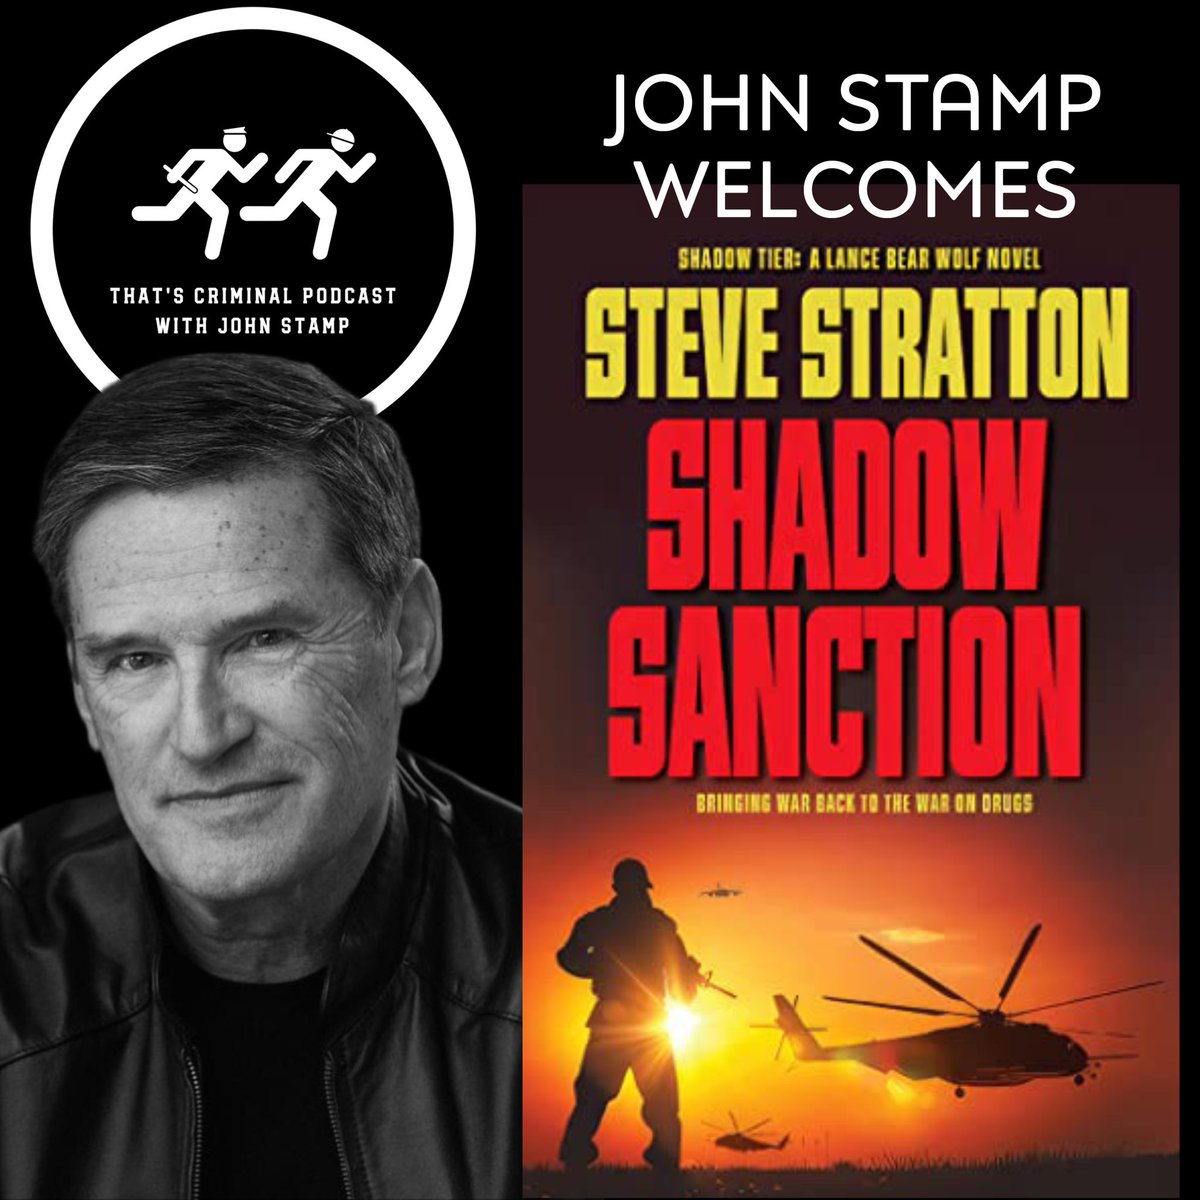 NEW EPISODE: Award-winning thriller author @strattonbooks returns to the show to discuss his new book SHADOW SANCTION, the latest in Stratton’s Lance Bear Wolf series, on sale now!

Listen now: spotify.link/H7F6tWtAODb

#podcast #thrillerbooks #militarythrillers #authorinterview